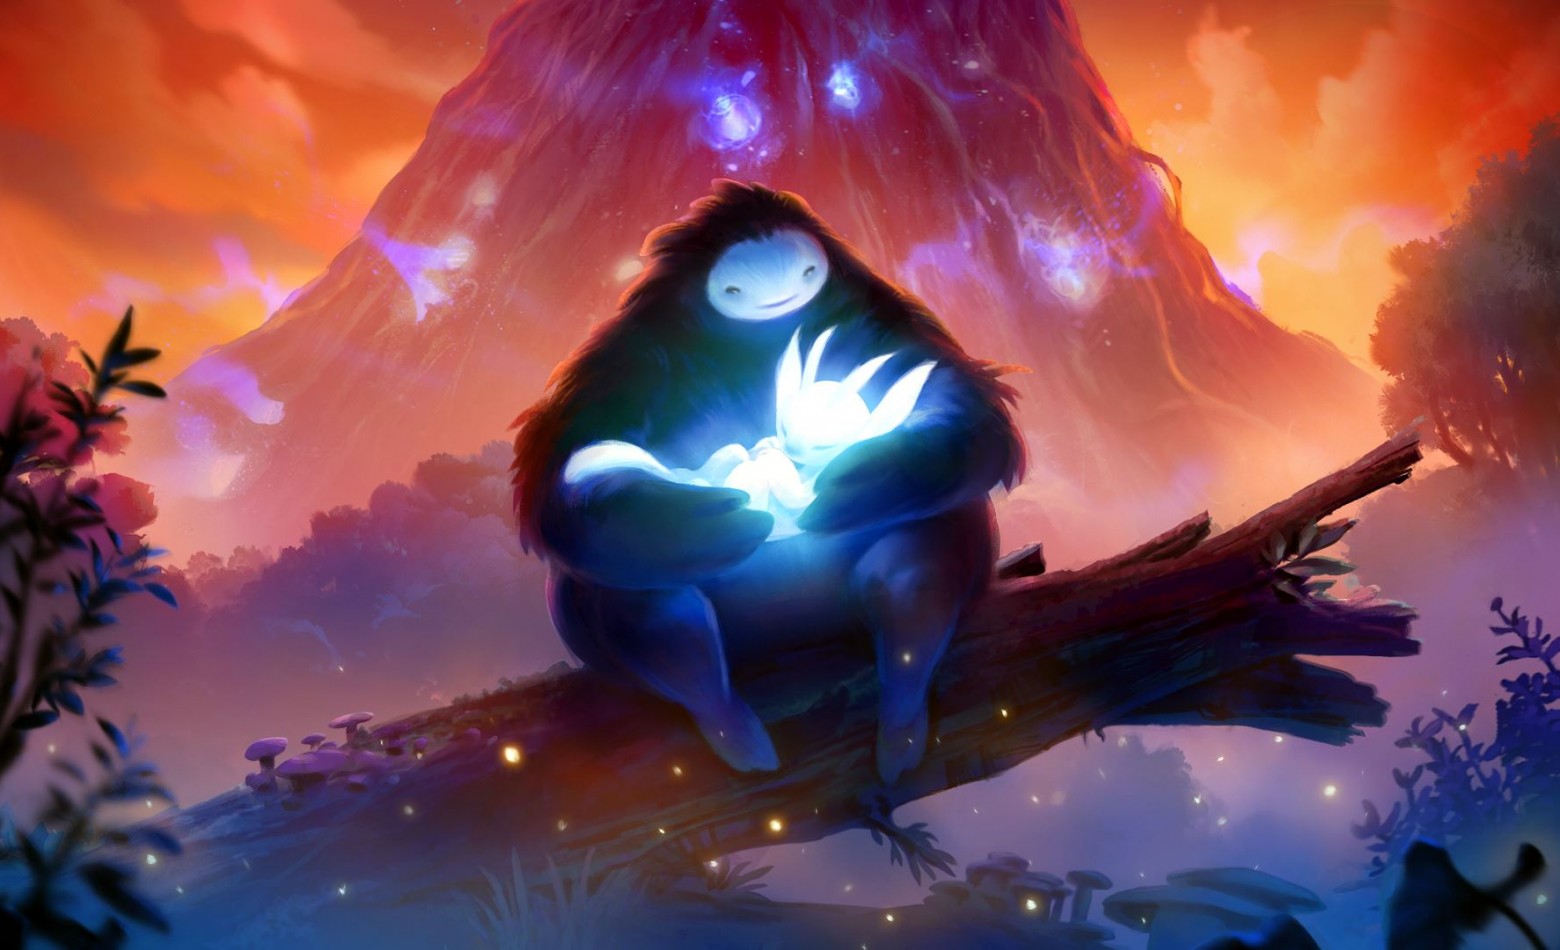 Gameplay – as cores e a arte de Ori and the Blind Forest: Definitive Edition